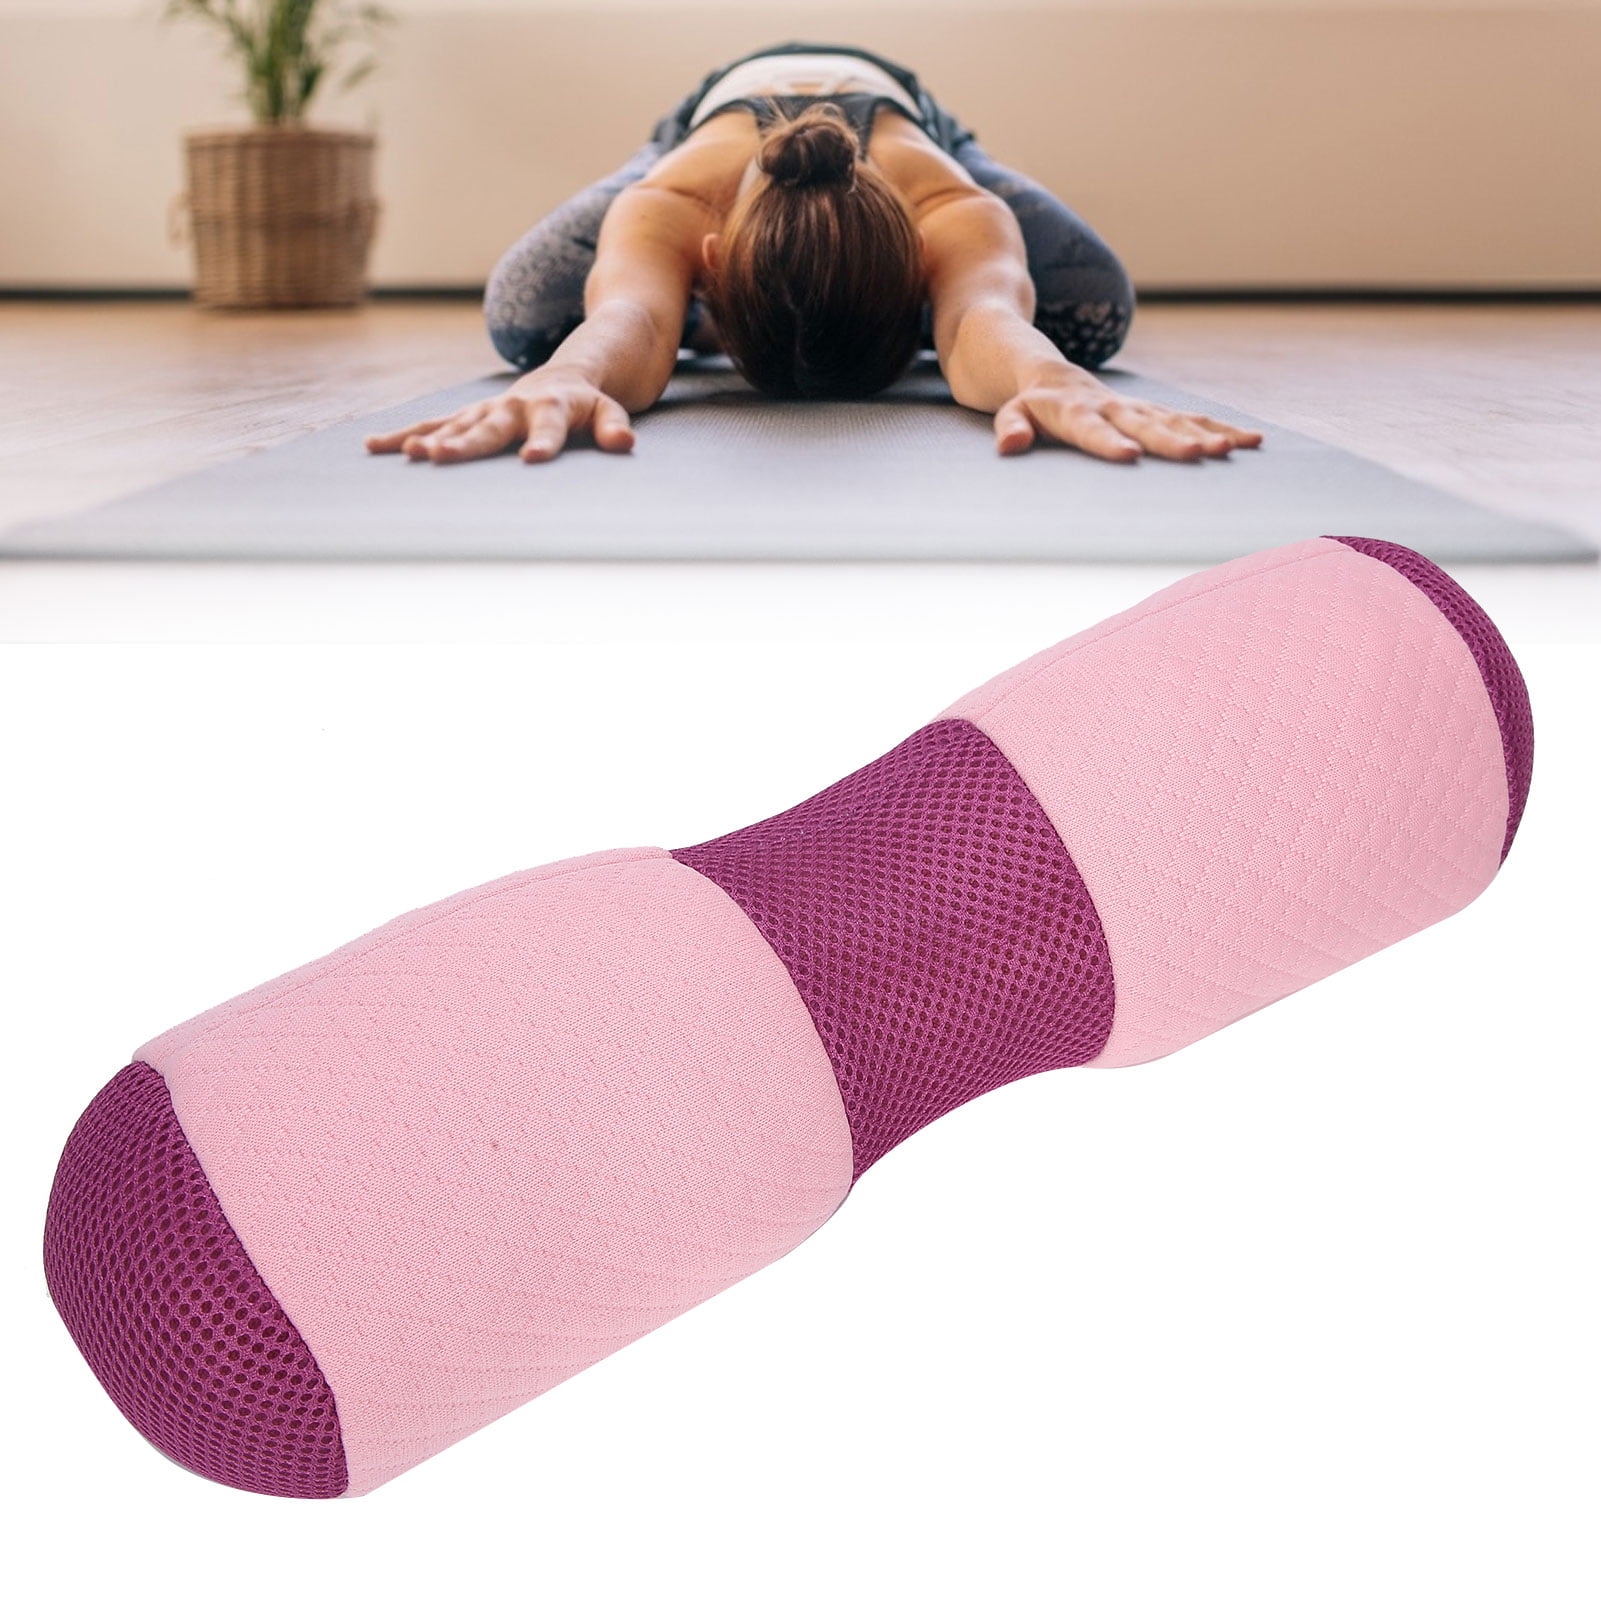 Removable durable cover for easy care Yoga Bolster Large Rectangular Leg/Back Cushion support for Active Yoga 25.5x13.75x9.5 